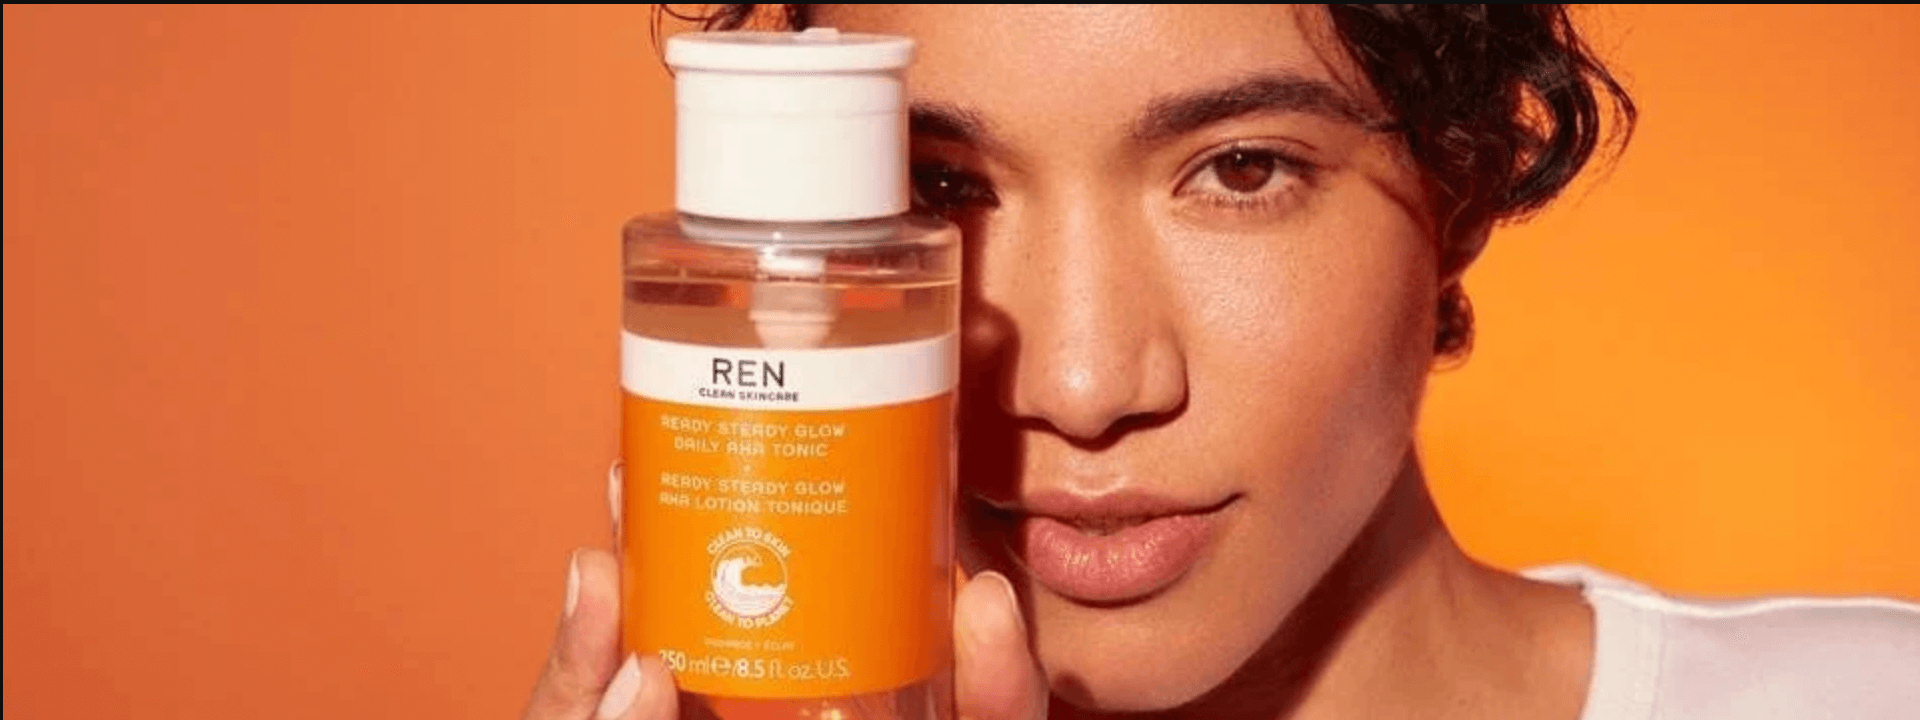 Skinfluencer promoting a product by Ren Skincare.